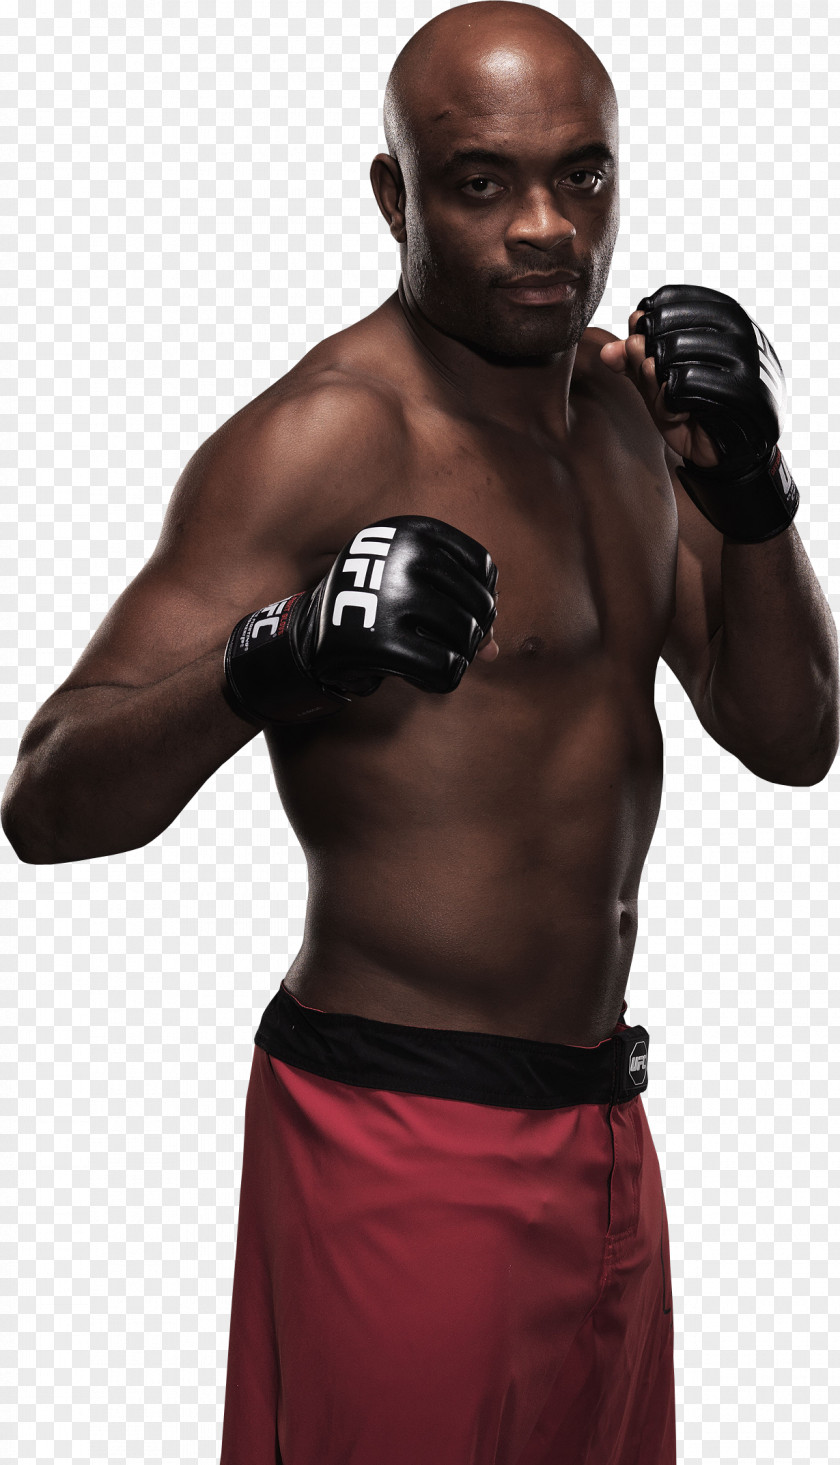 Wrestling Anderson Silva Ultimate Fighting Championship Boxing Athlete PNG